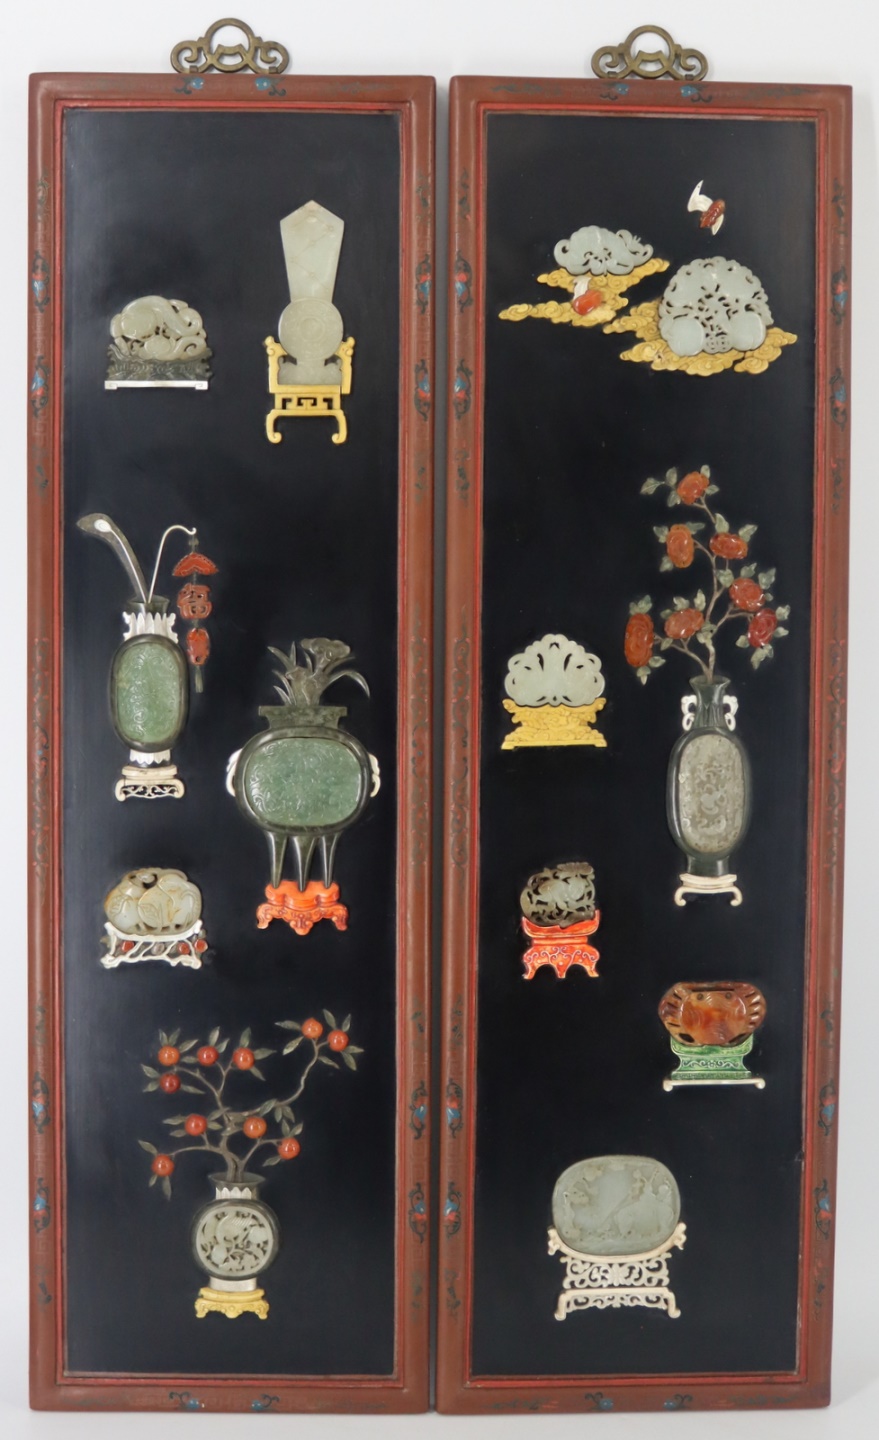 PAIR OF ASIAN PANELS INLAID WITH